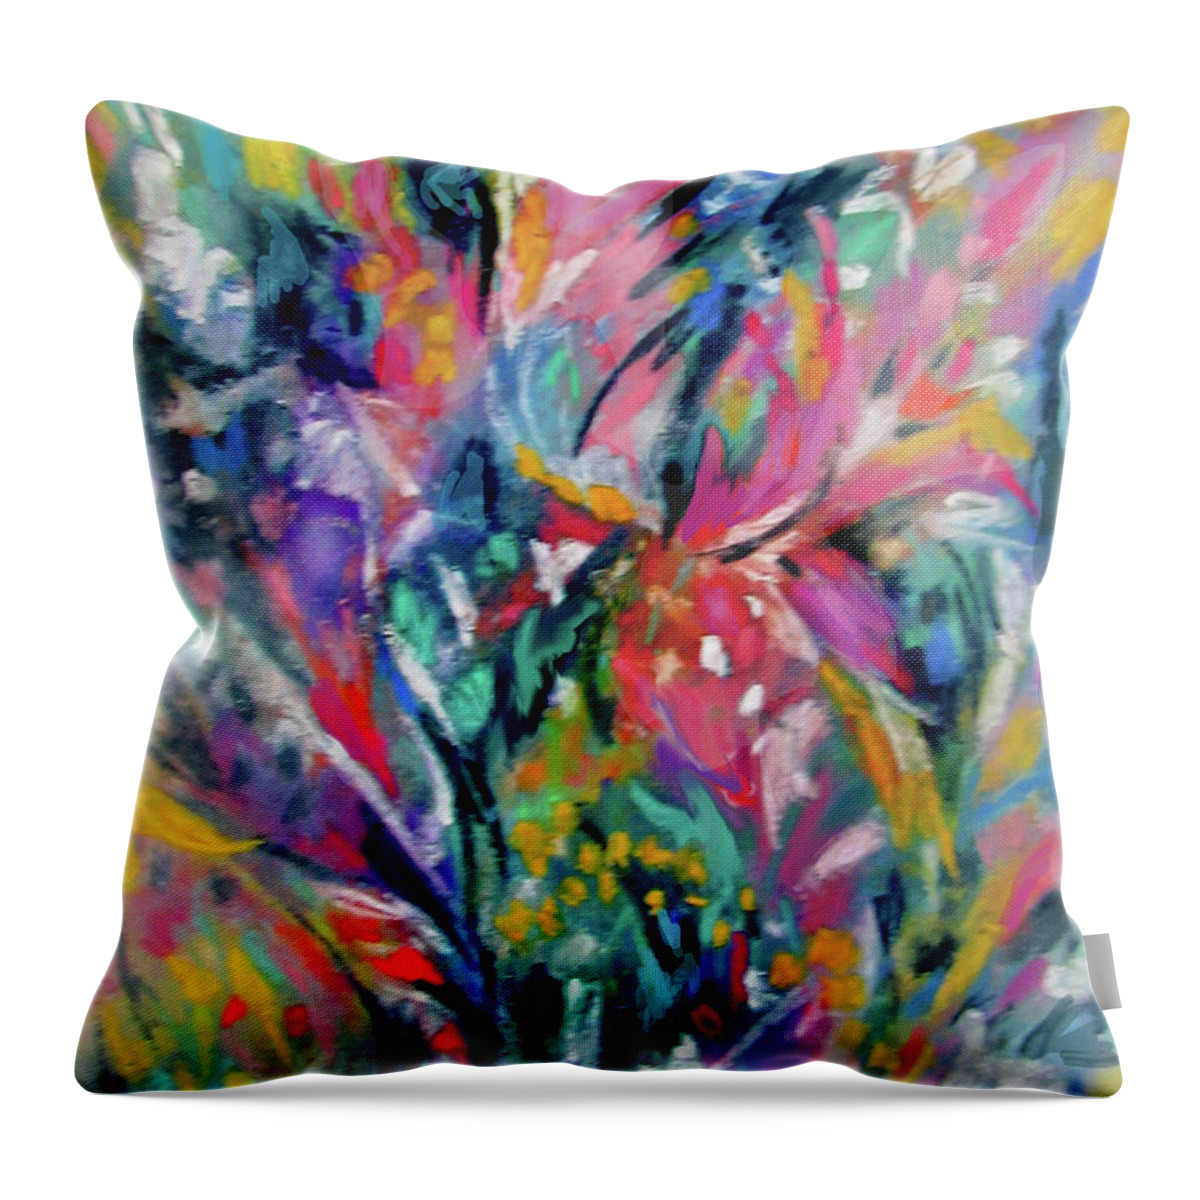 Abstract Flowers Throw Pillow featuring the painting Bouquet 37 by Jean Batzell Fitzgerald